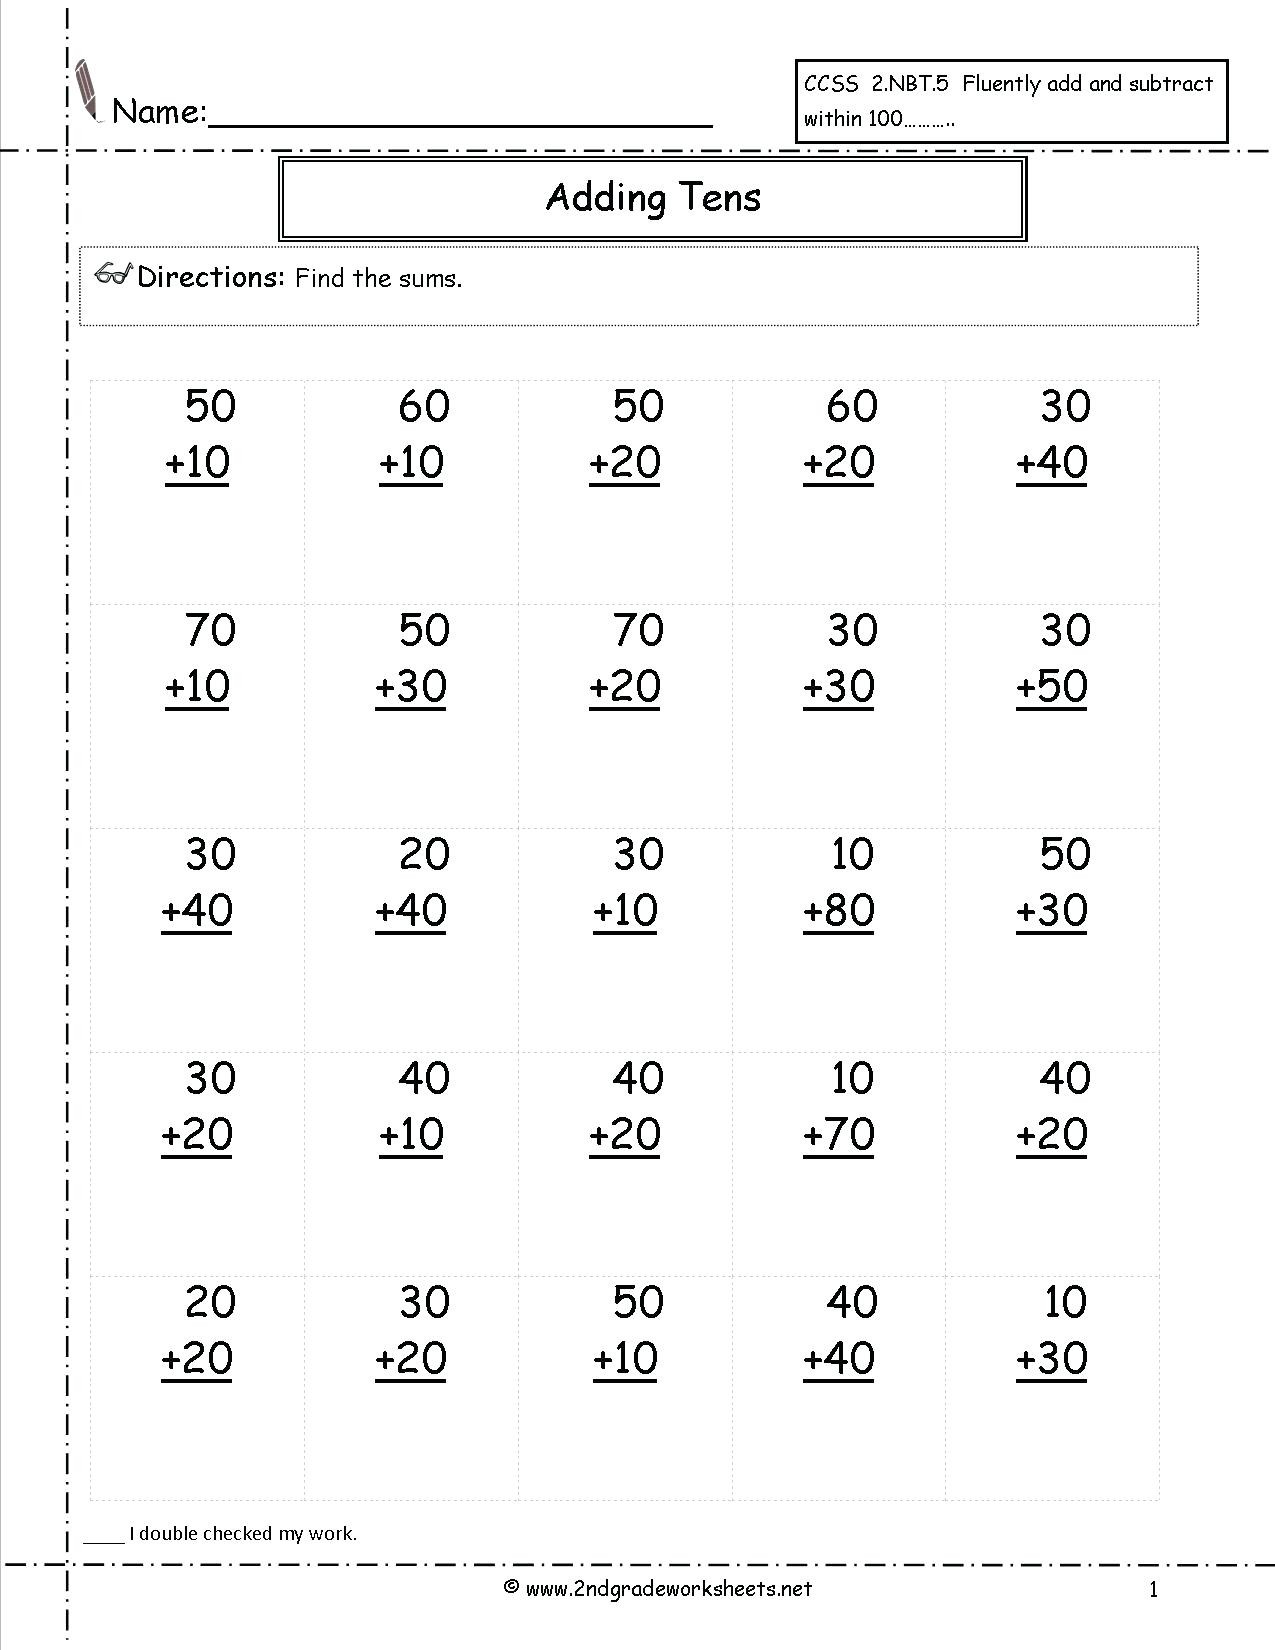 5 Free Math Worksheets Fourth Grade 4 Addition Adding Whole Tens 4 Addends AMP